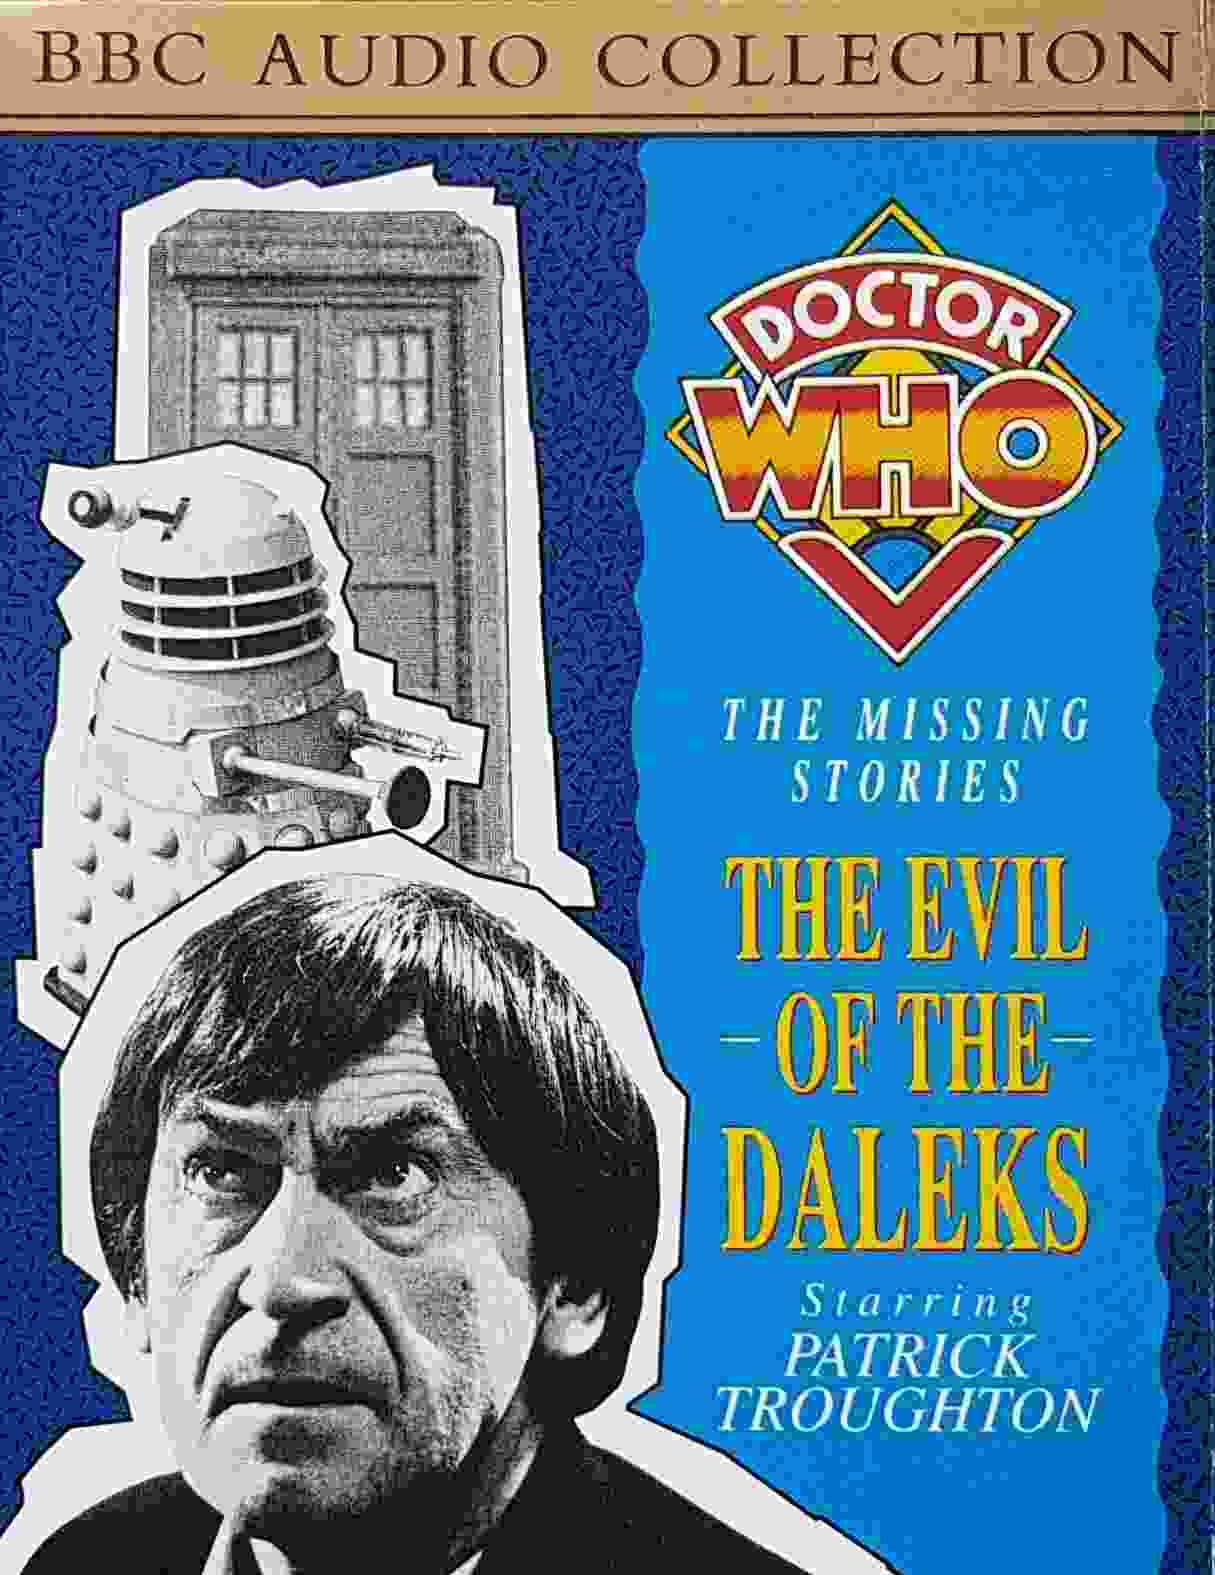 Picture of ZBBC 1303 Doctor Who - The evil of the Daleks by artist Unknown from the BBC cassettes - Records and Tapes library